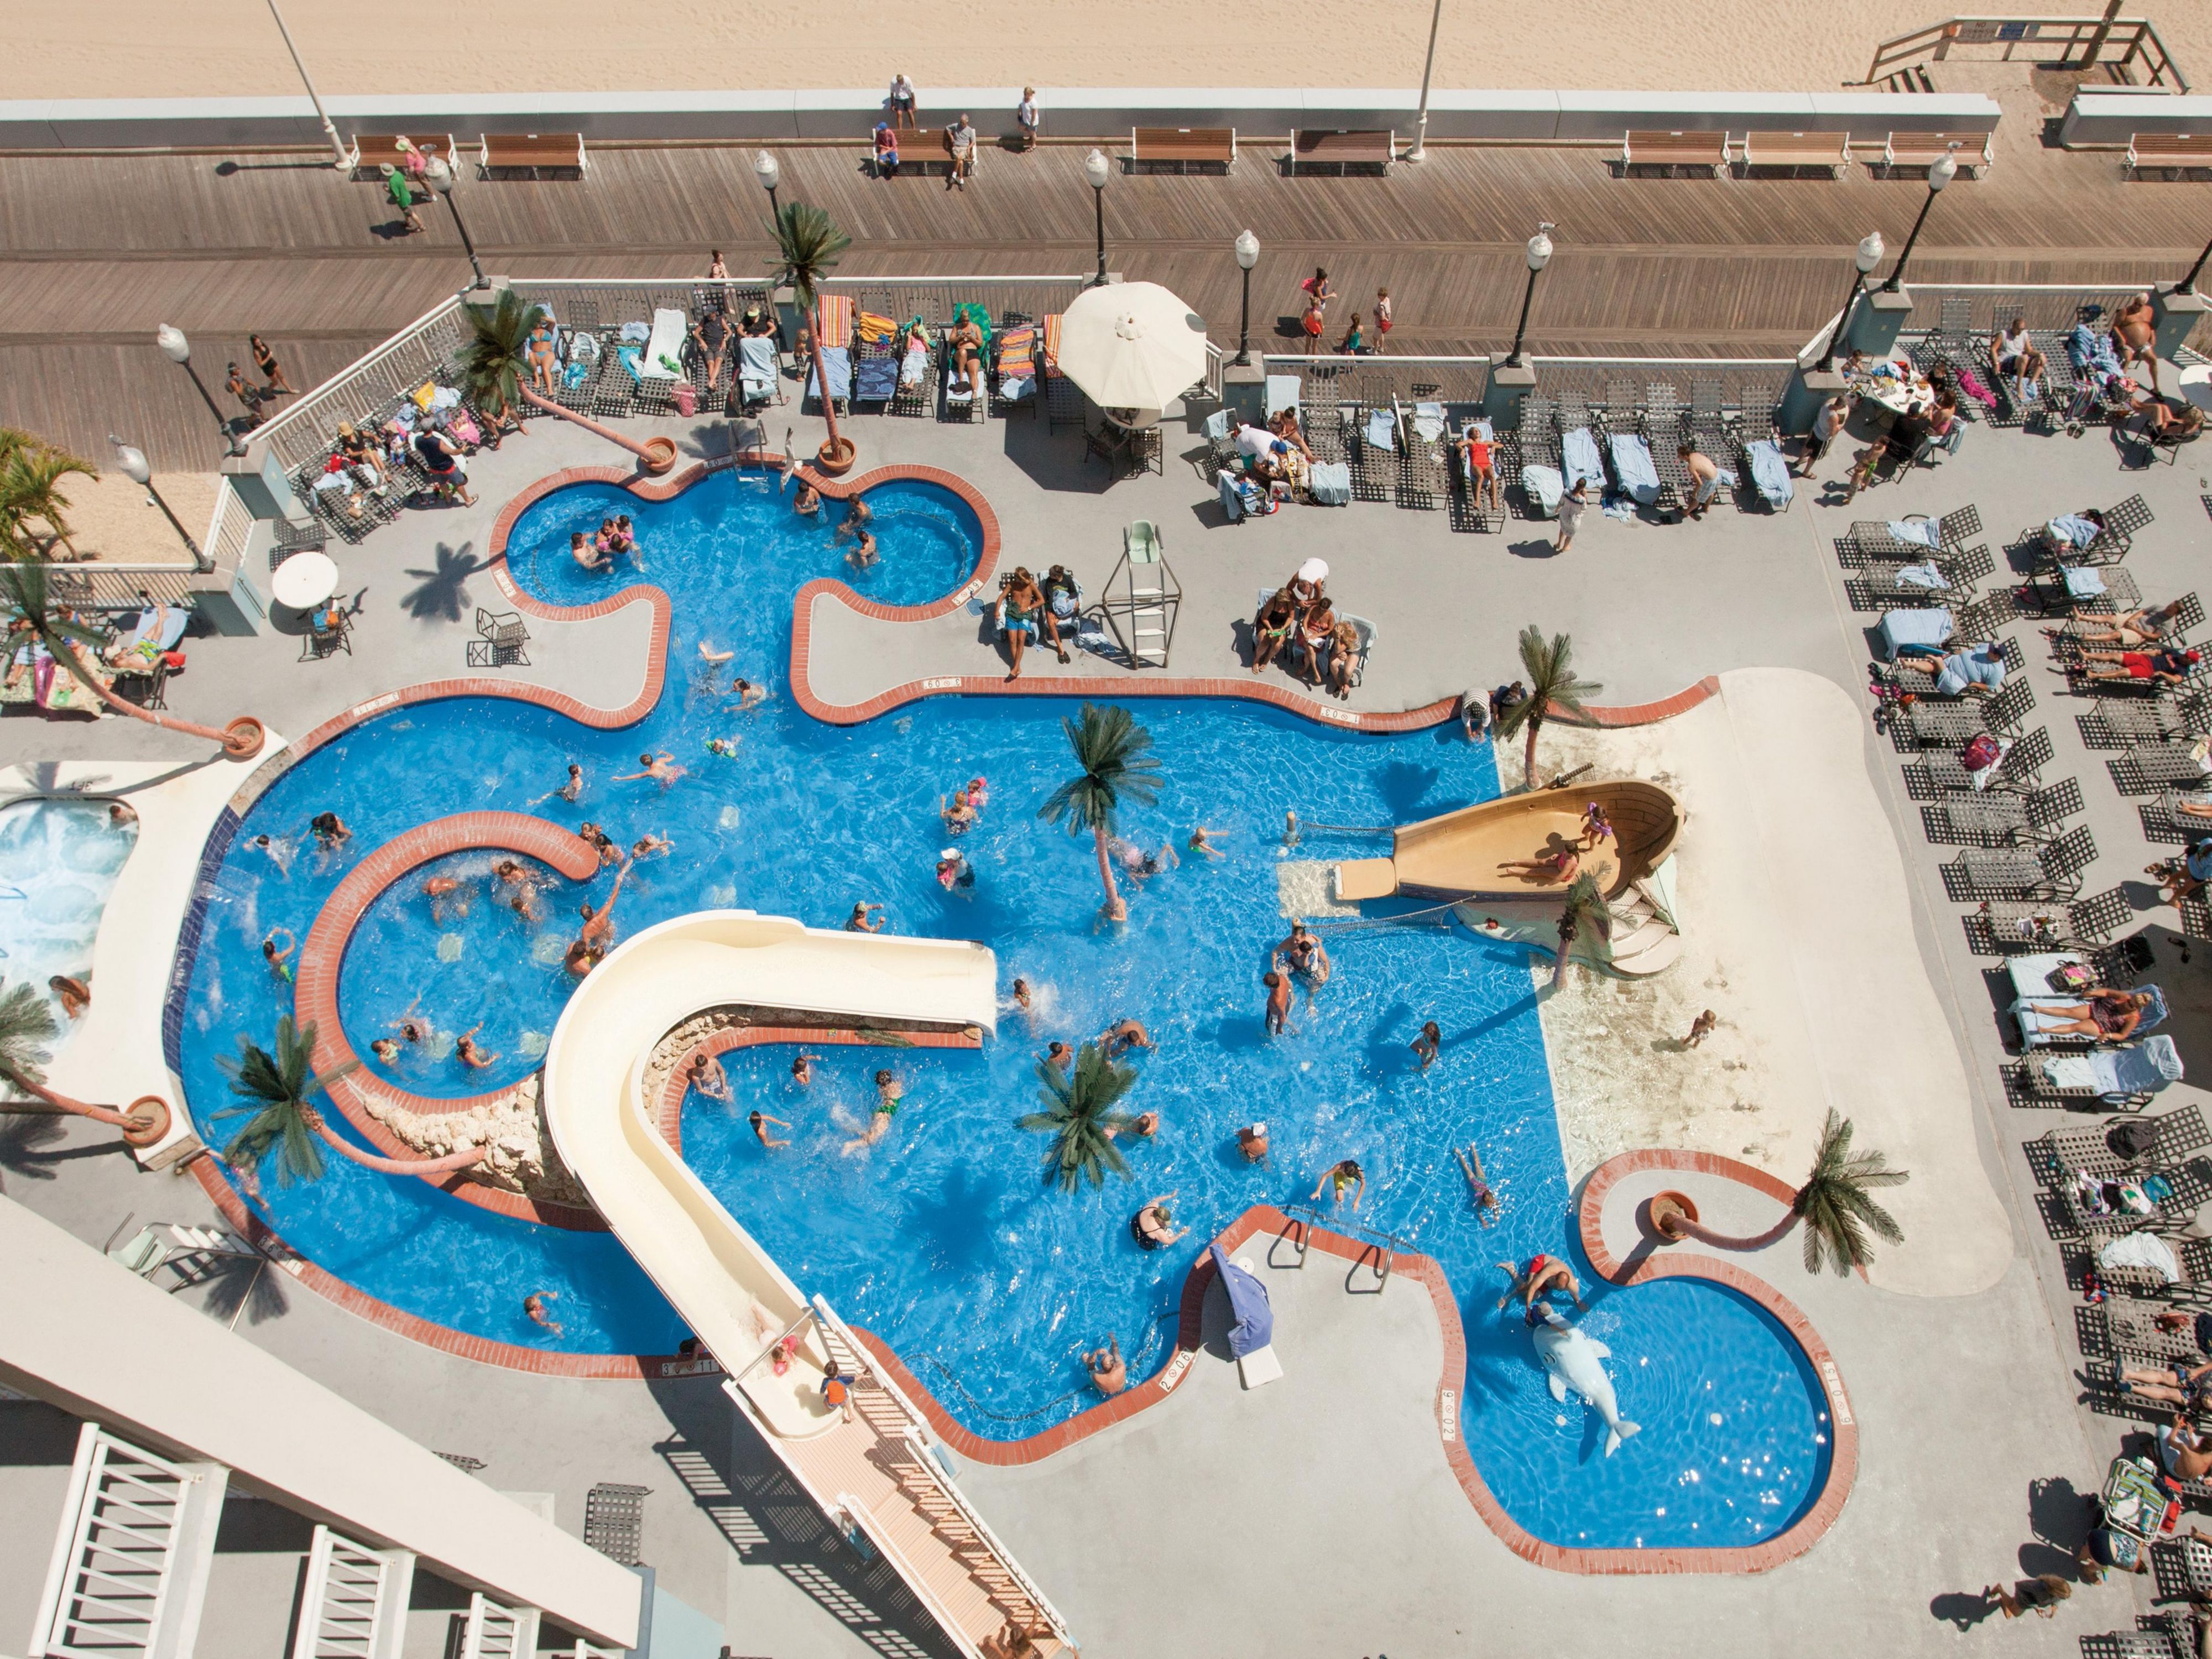 One of two outdoor pools, the children's play pool offers a gradual entry slope, fountains, and a water slide. Our main outdoor pool is designed for confident swimmers, ideal for floating or swimming laps. Our indoor pool provides year-round fun in the water for those booking in the off-season. 